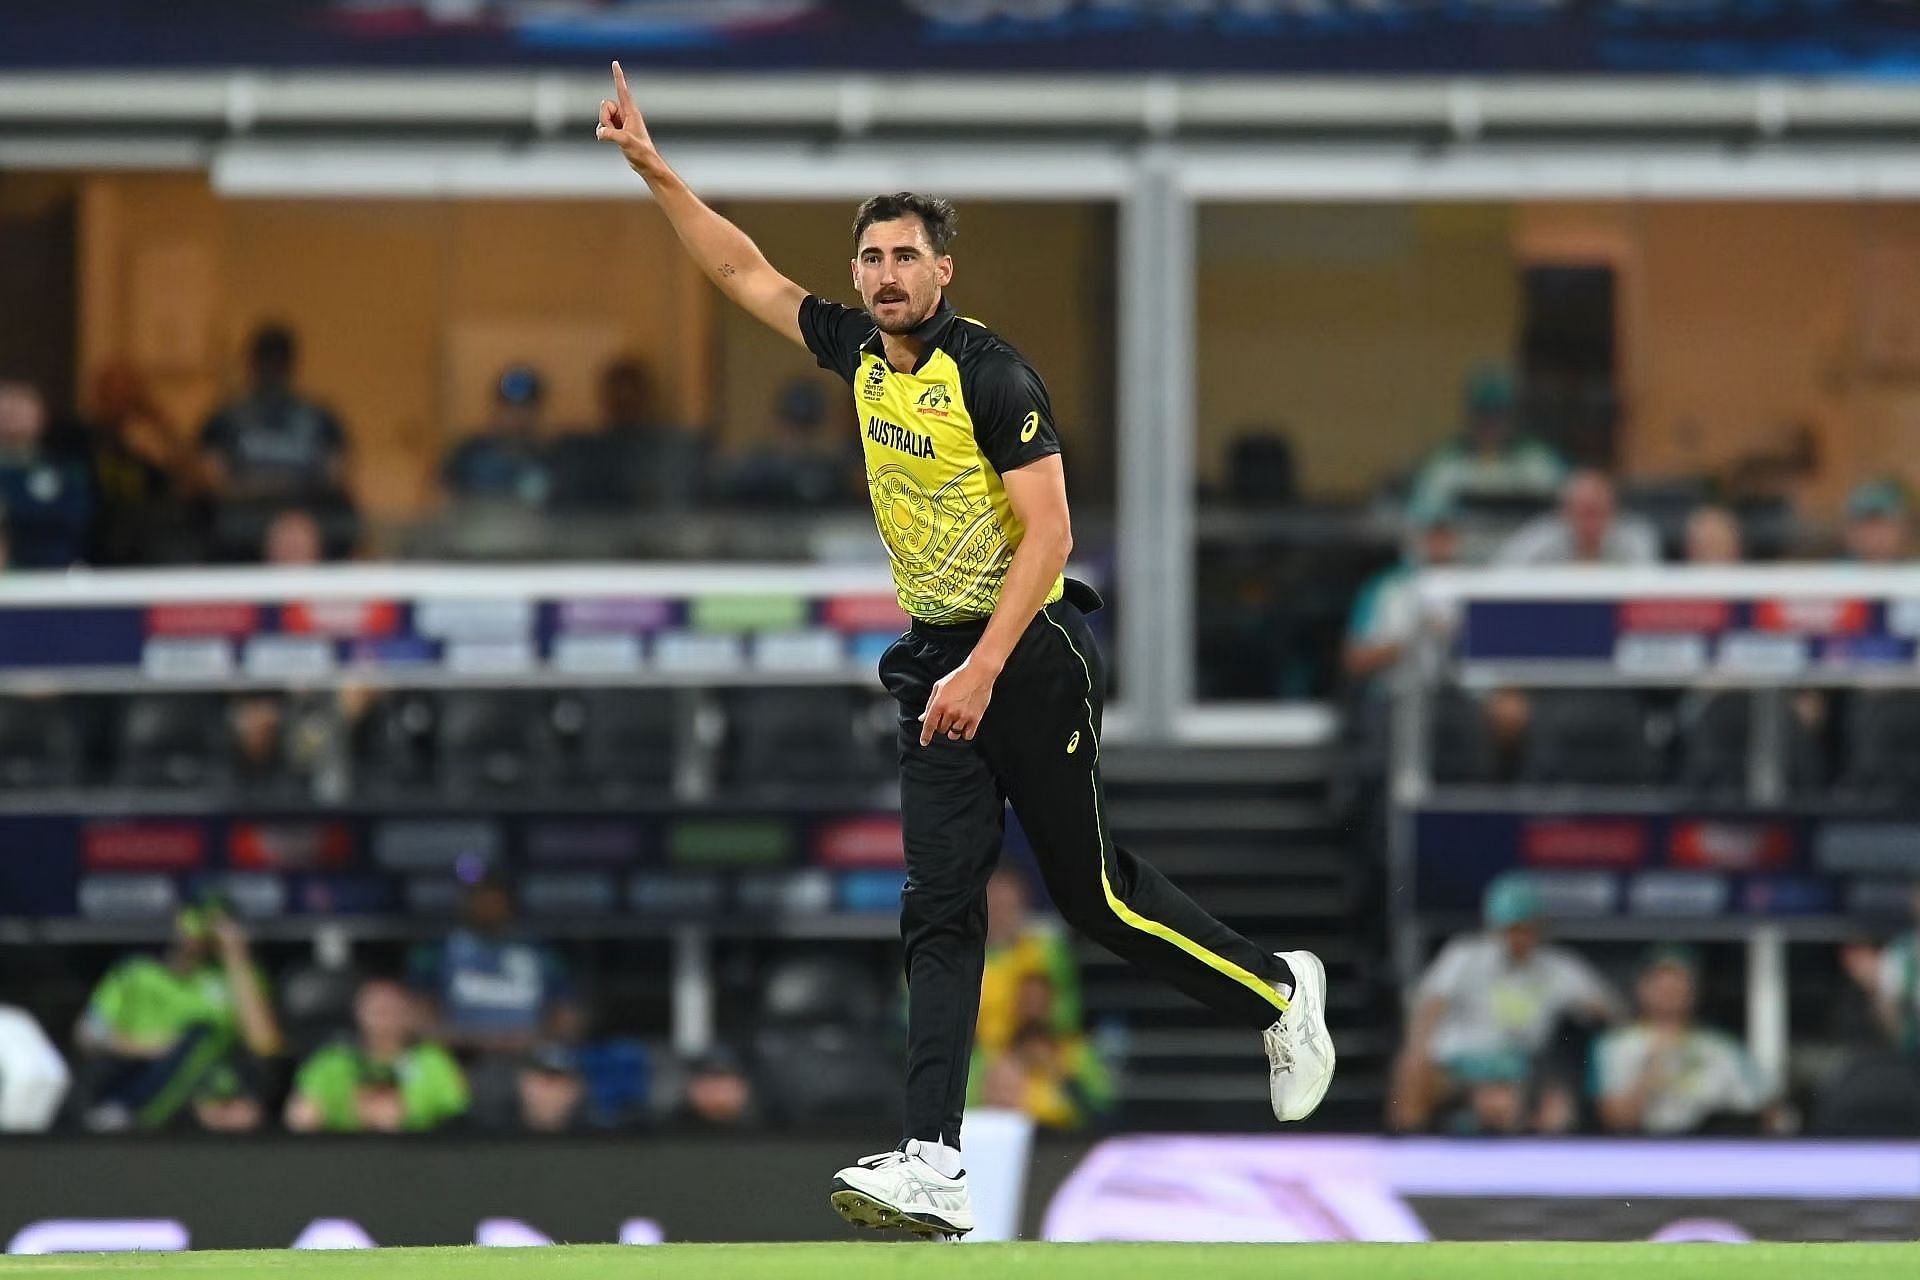 Mitchell Starc became the most expensive buy in IPL auction history. [P/C: Getty]